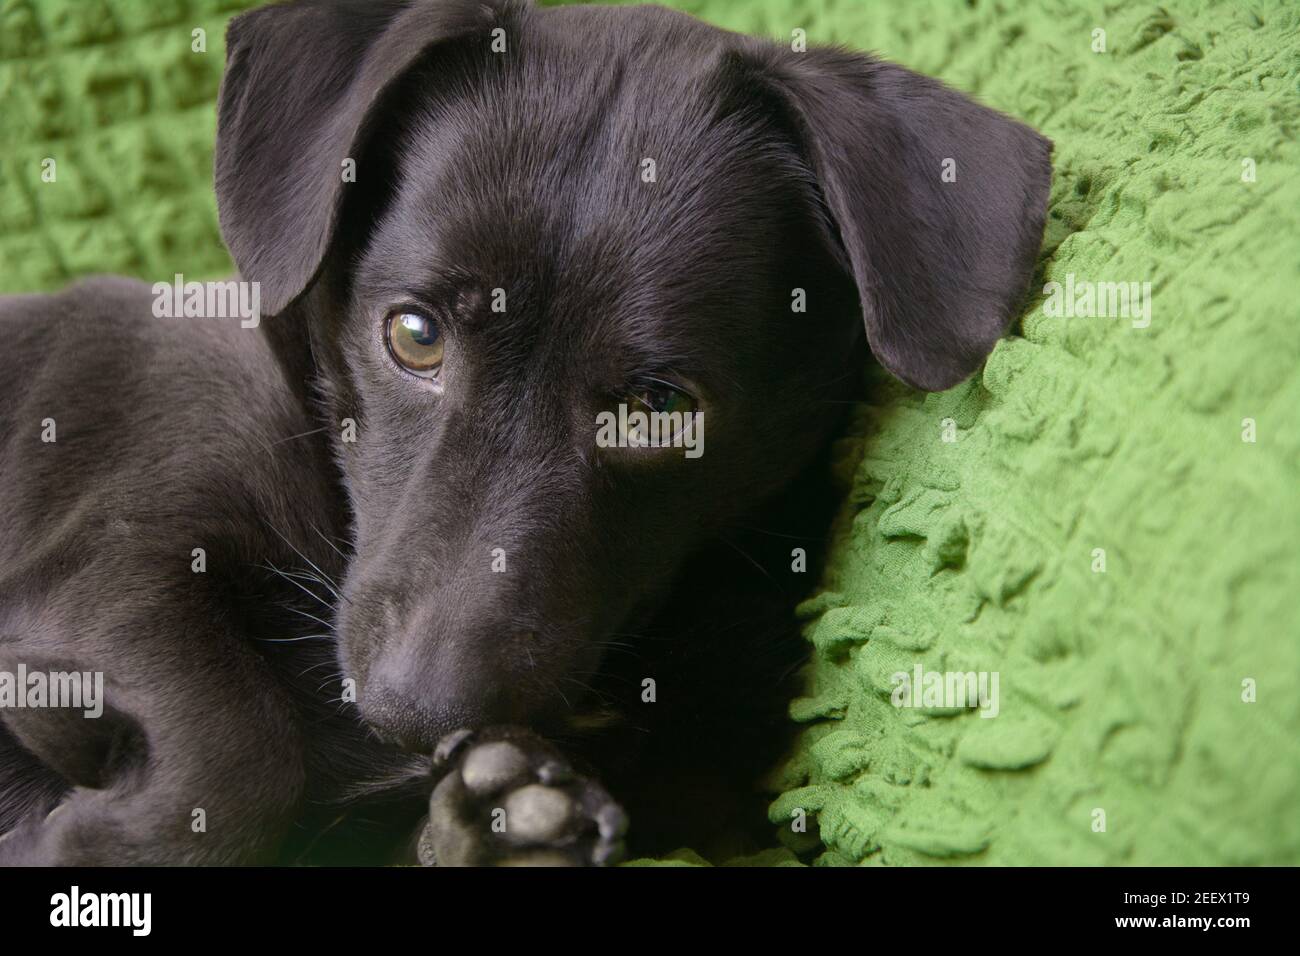 Portrait of  small black dog close-up. Playful puppy looks at camera. Concept of love for pets. Stock Photo